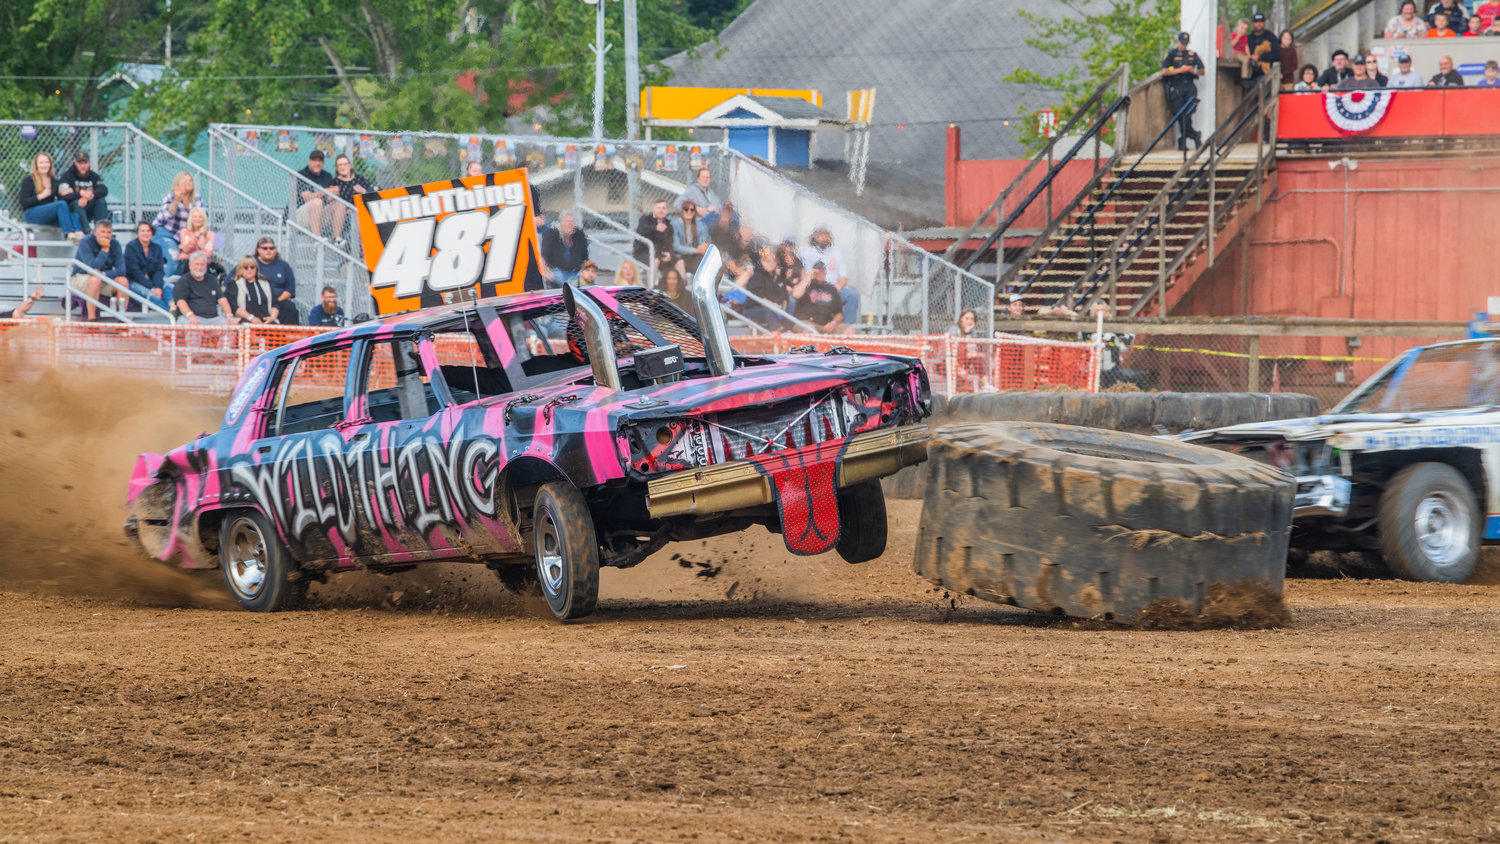 “Wild Thing” clips a tire during a race at the Southwest Washington Fairgrounds Sunday night during Summerfest celebrations.